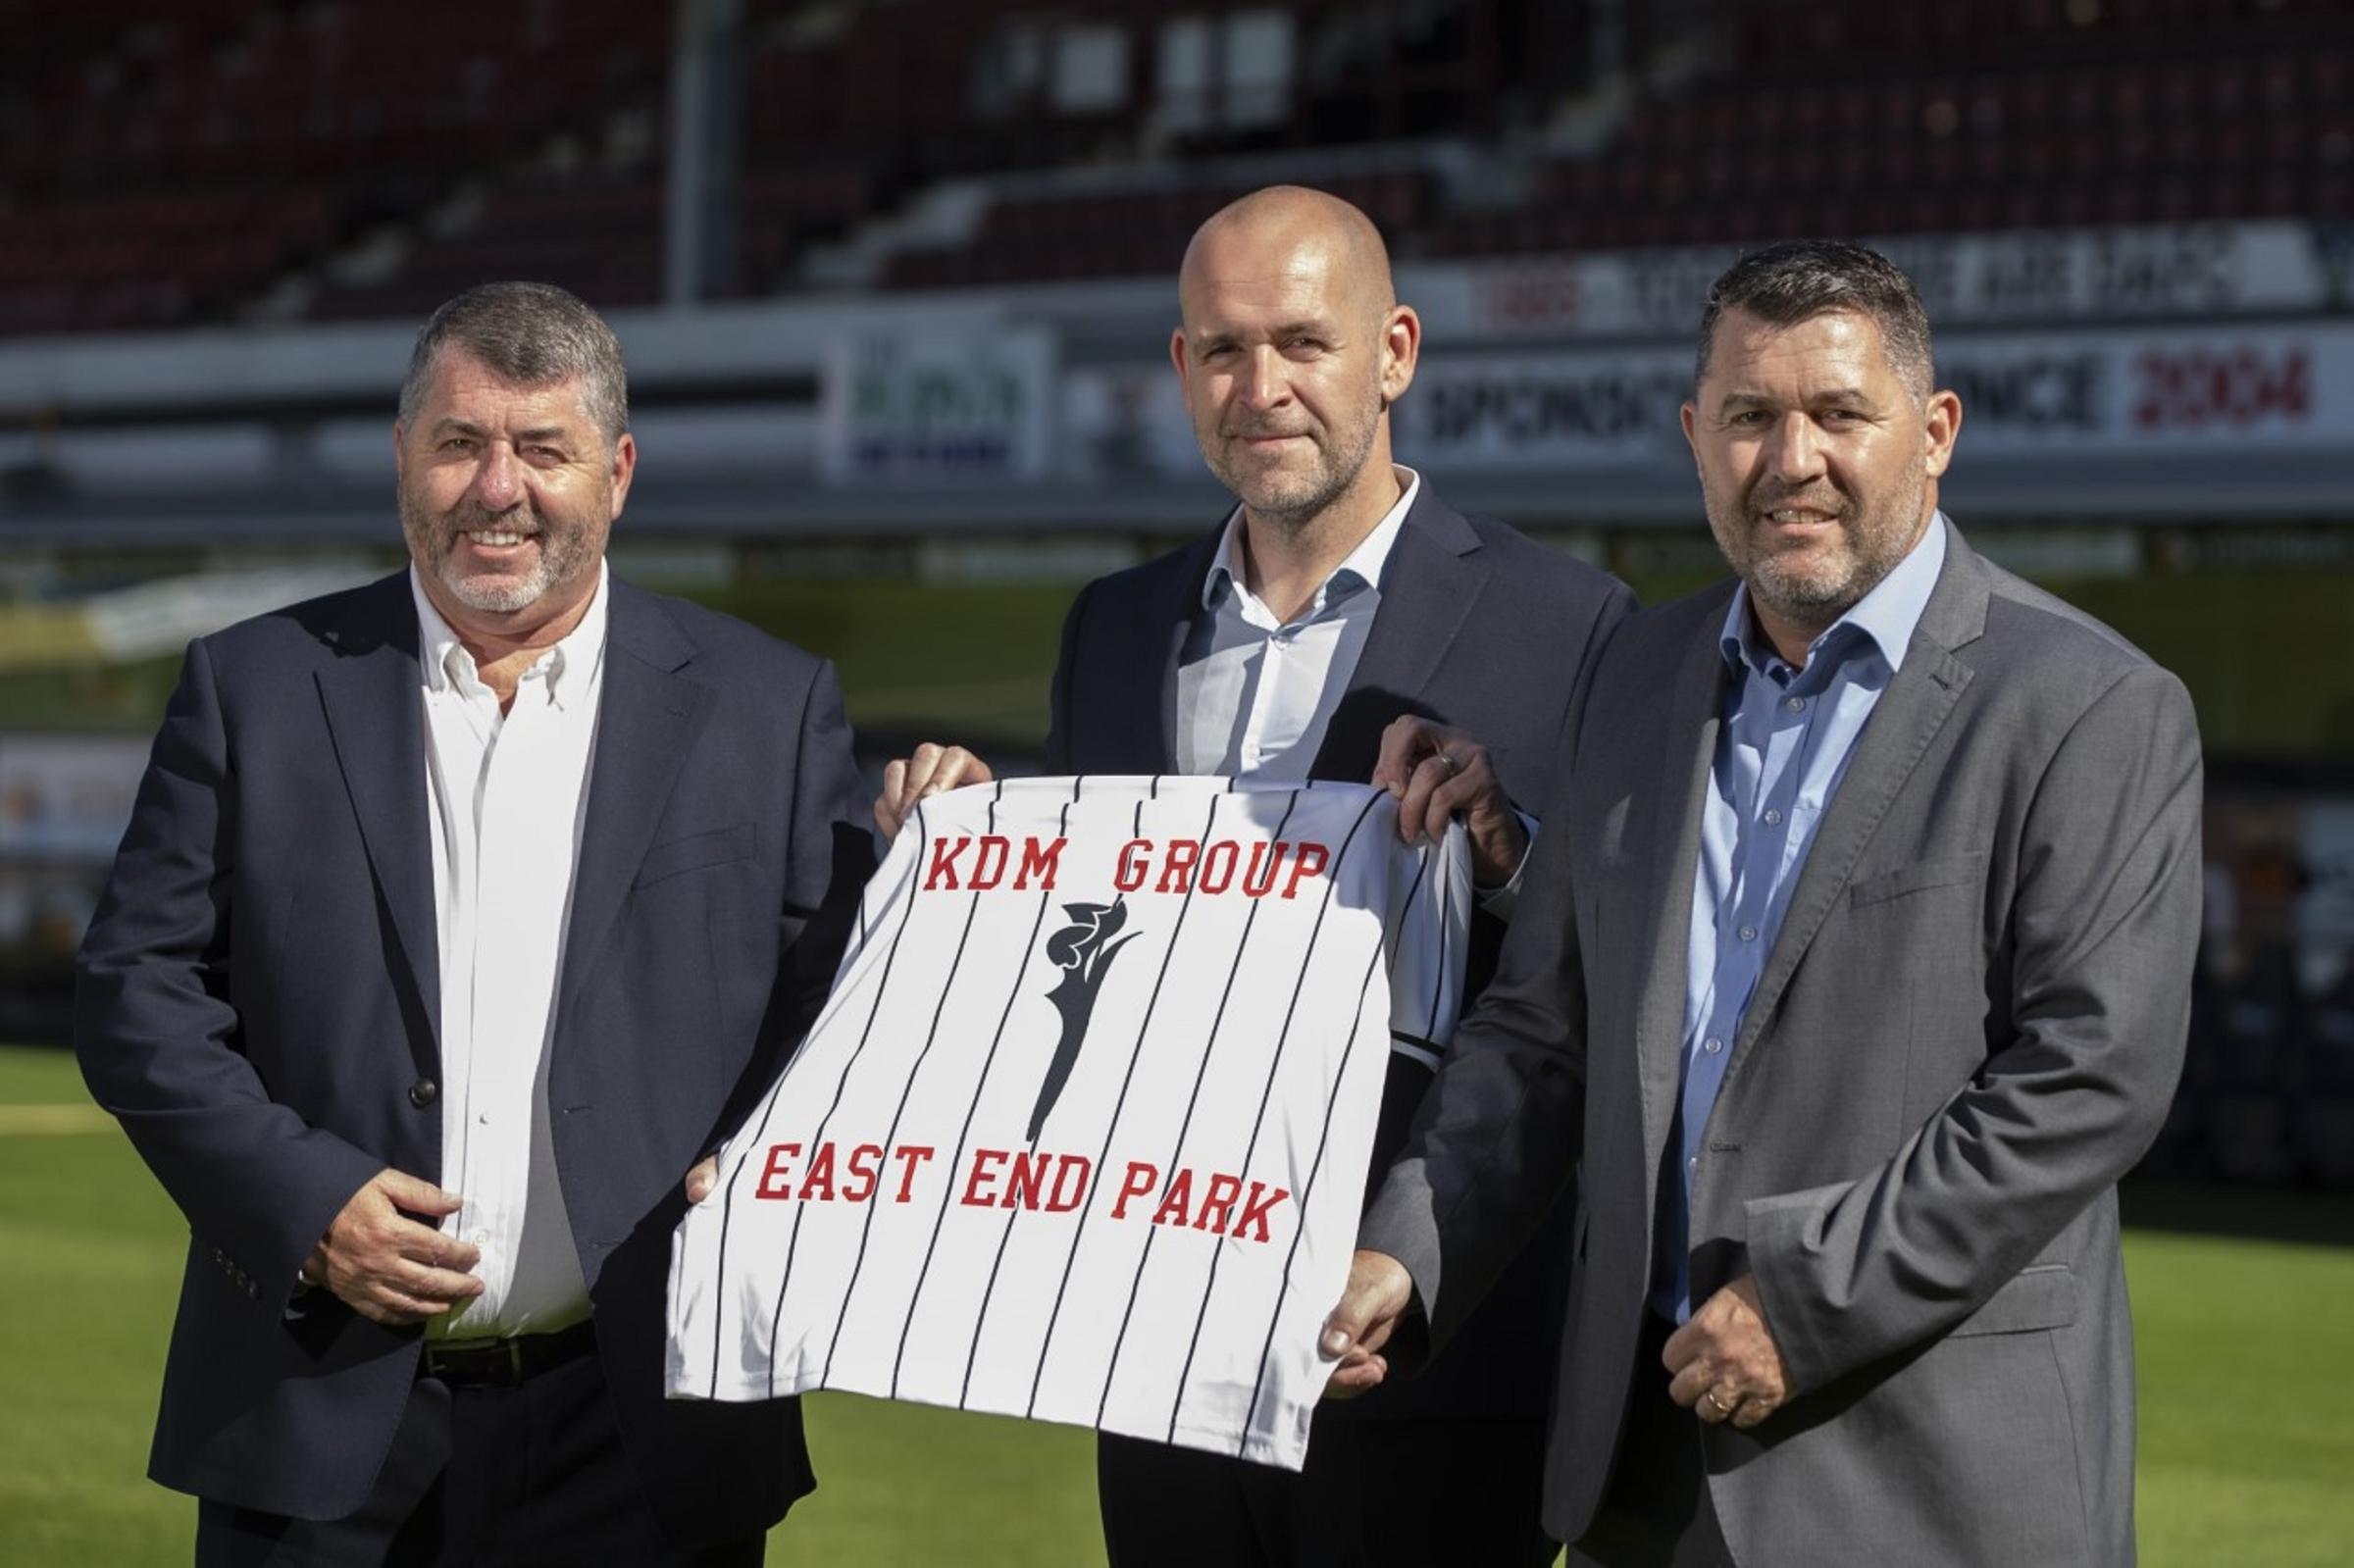 Dunfermline Athletic stadium gets new name after club teams up with Dalgety Bay's KDM group